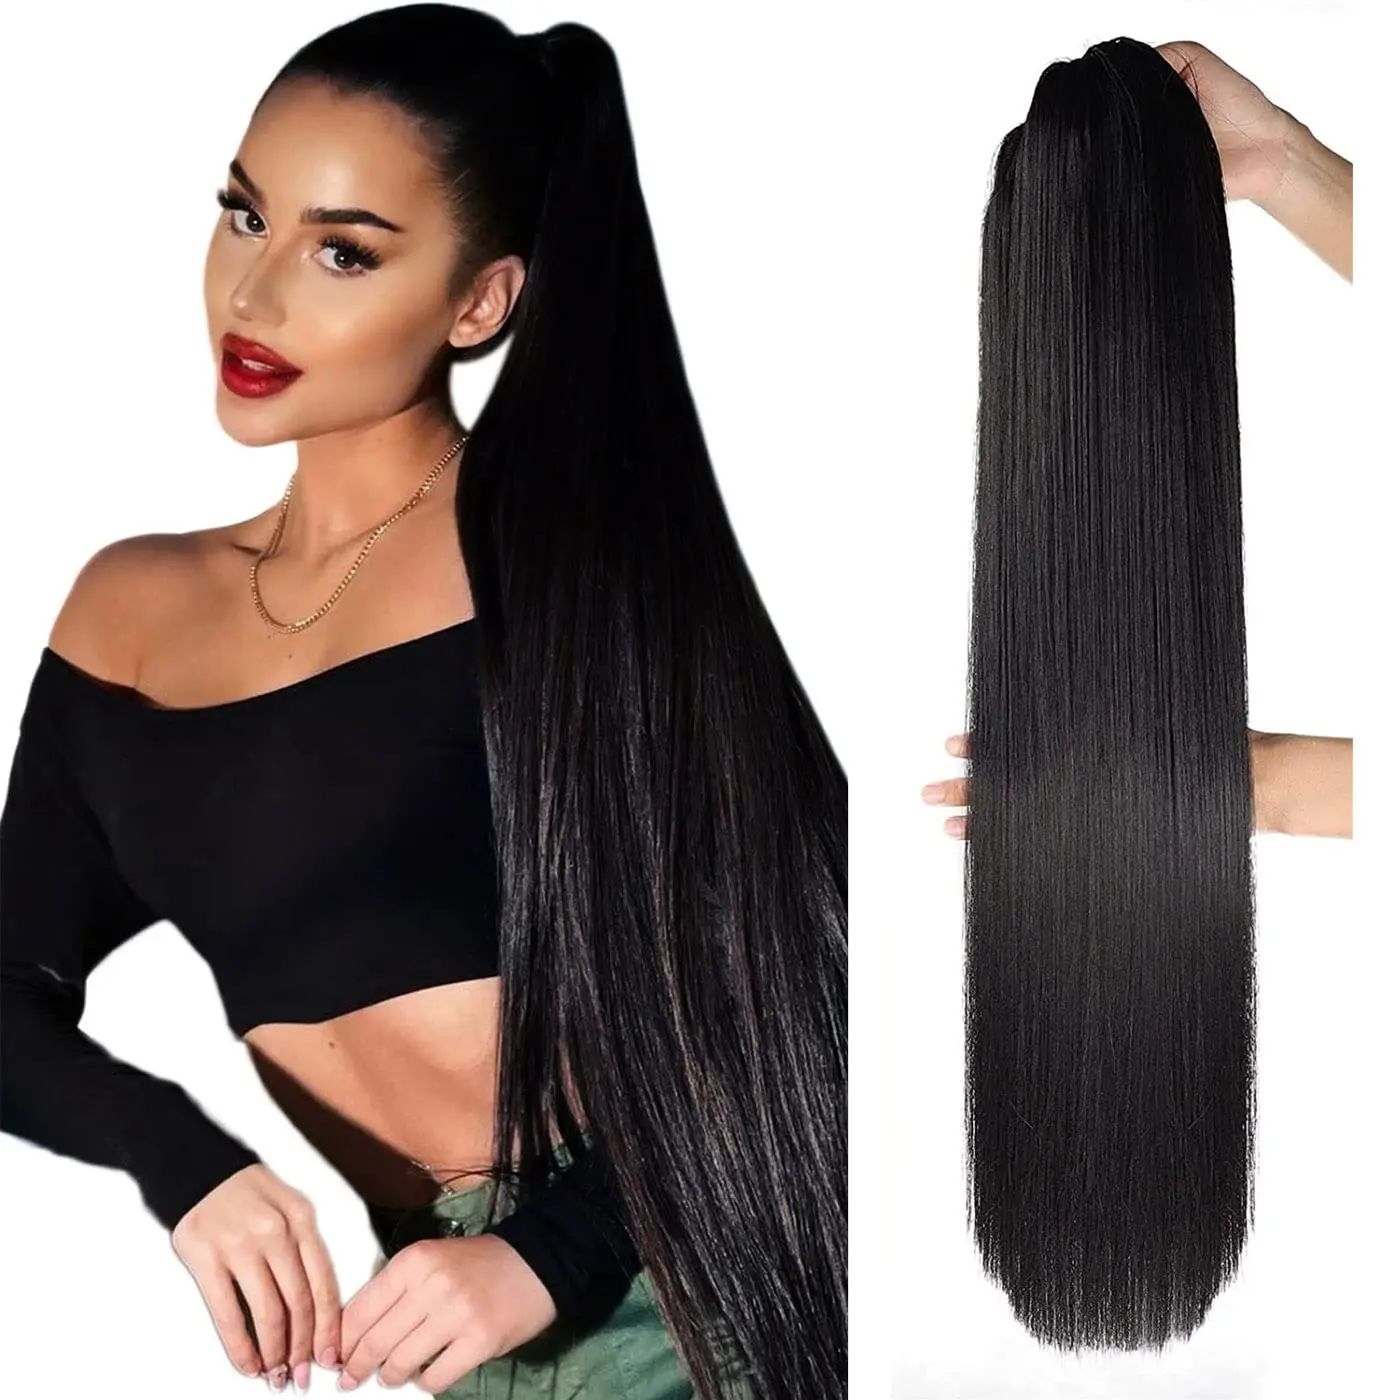 

Straight Synthetic Drawstring Ponytail Extension Hair Clip-On Hair Curly False Pigtail Wrap Around Horse Tail Women Hairpieces